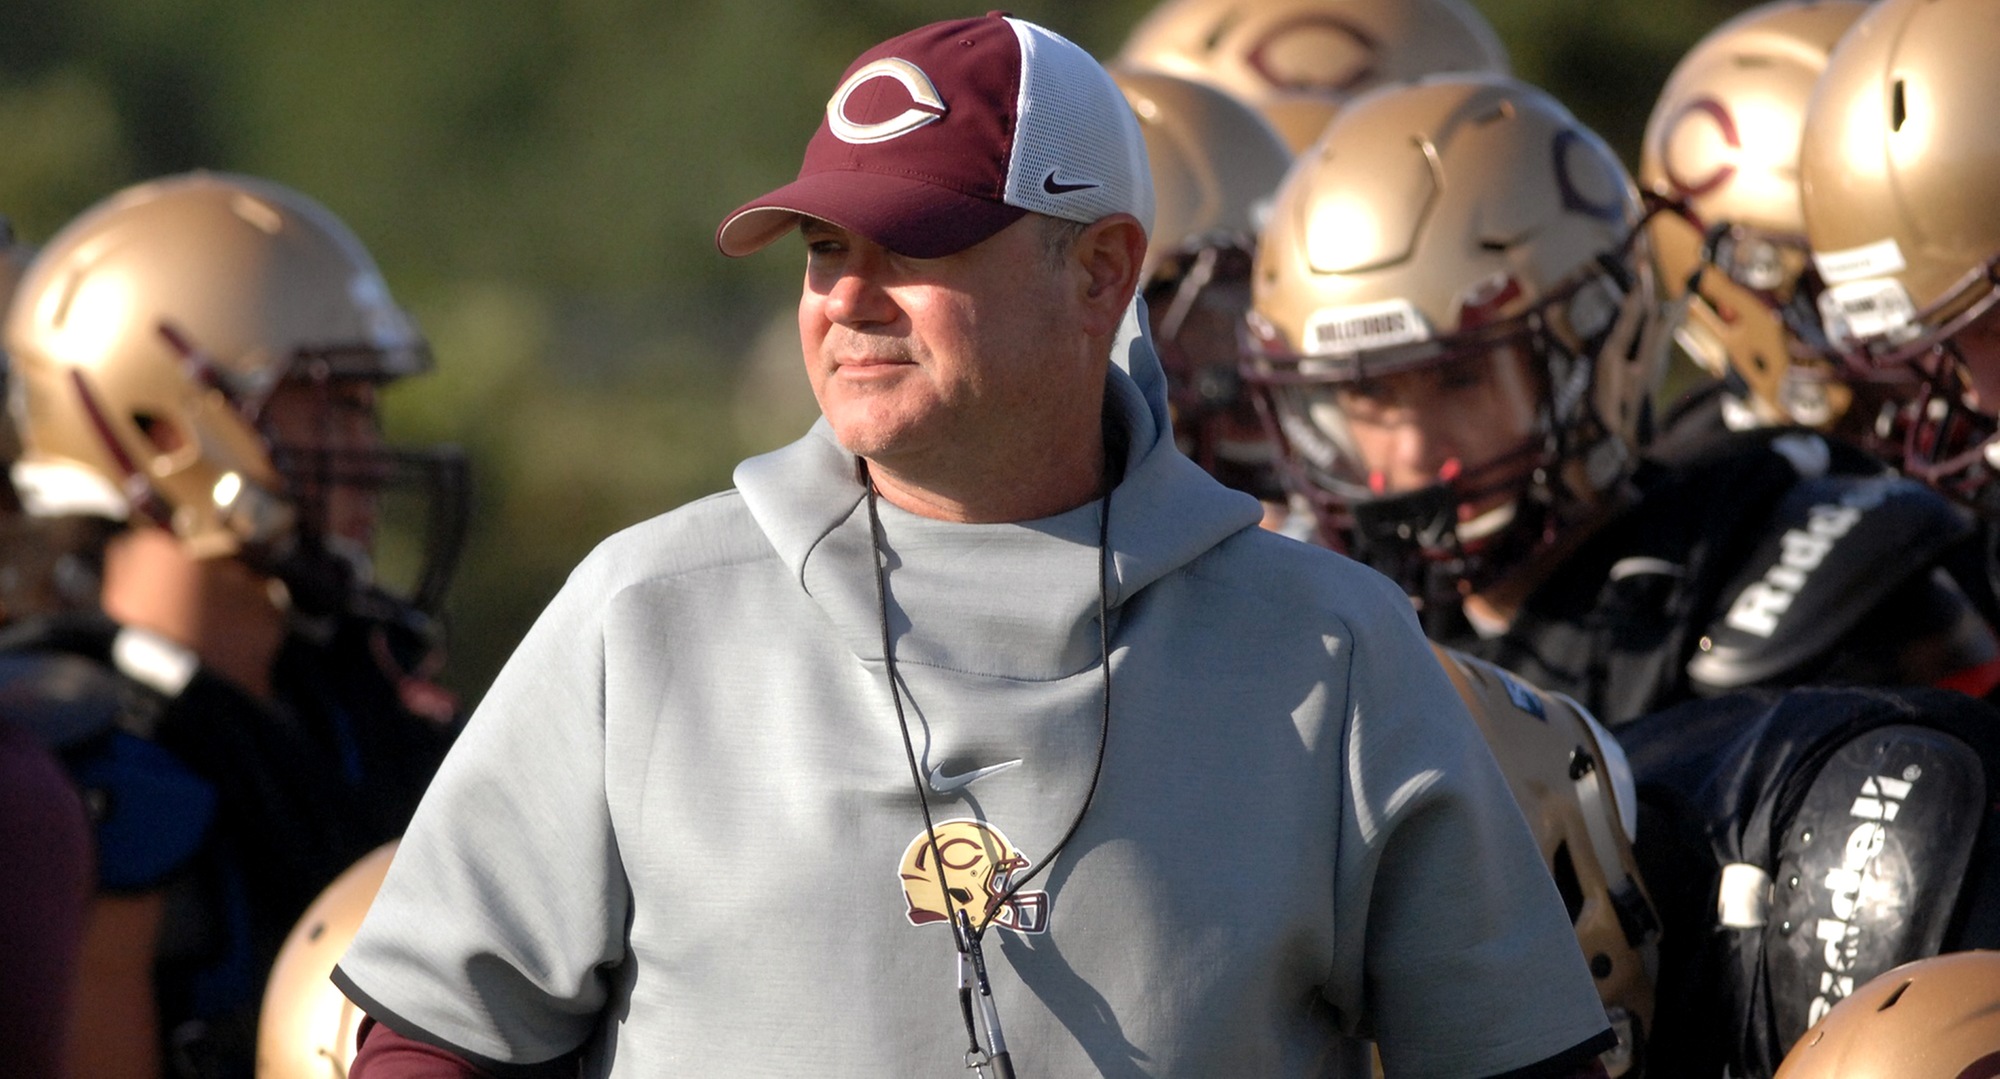 Concordia head coach Terry Horan announced his record-setting incoming recruiting class.